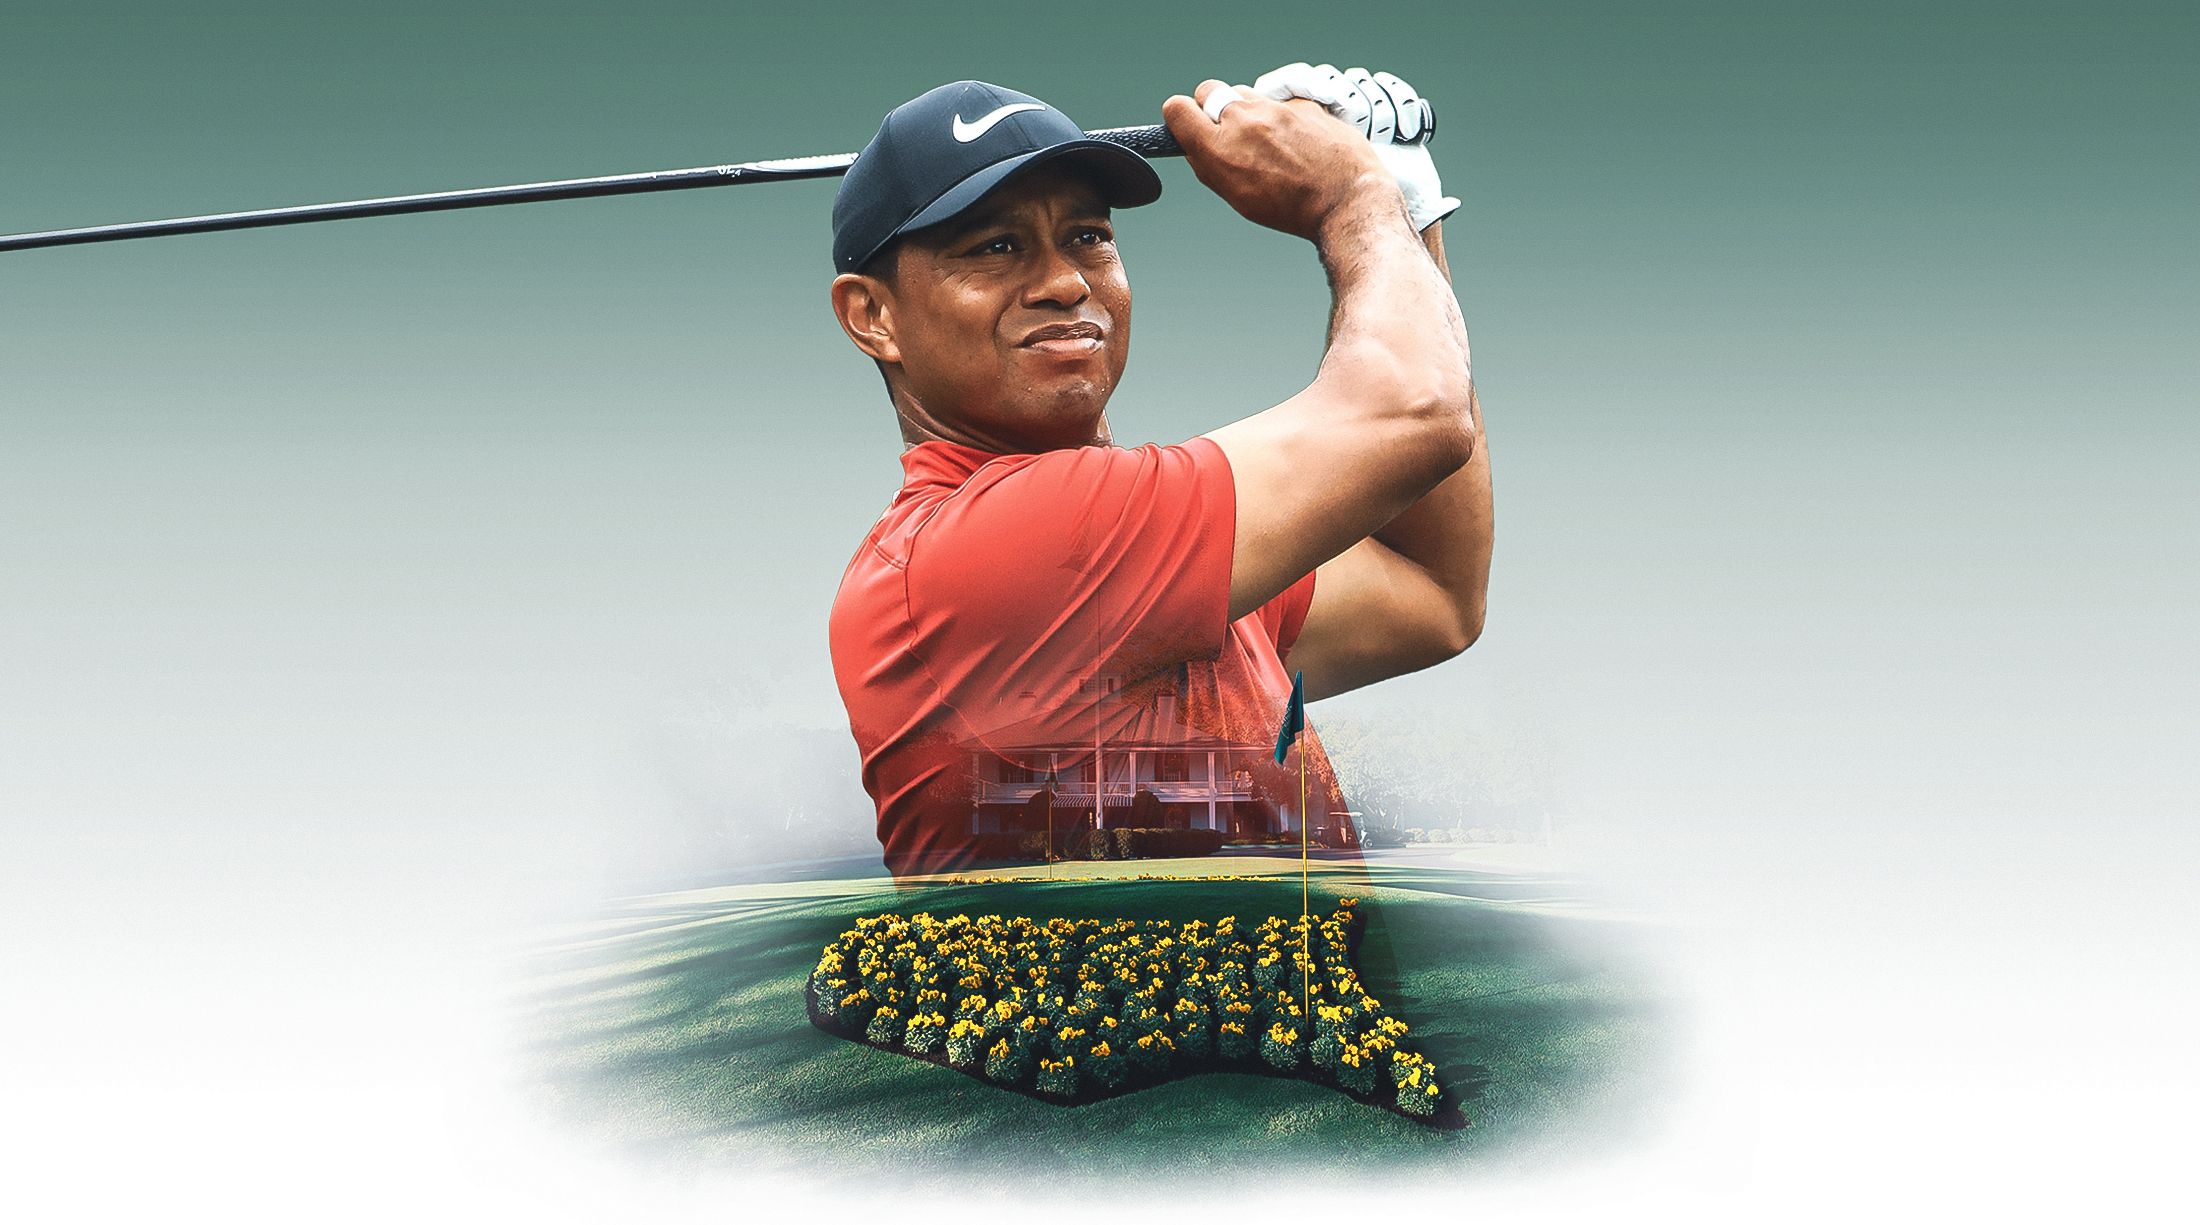 Tiger Woods wins Masters, first major since 2008 with finalround 70